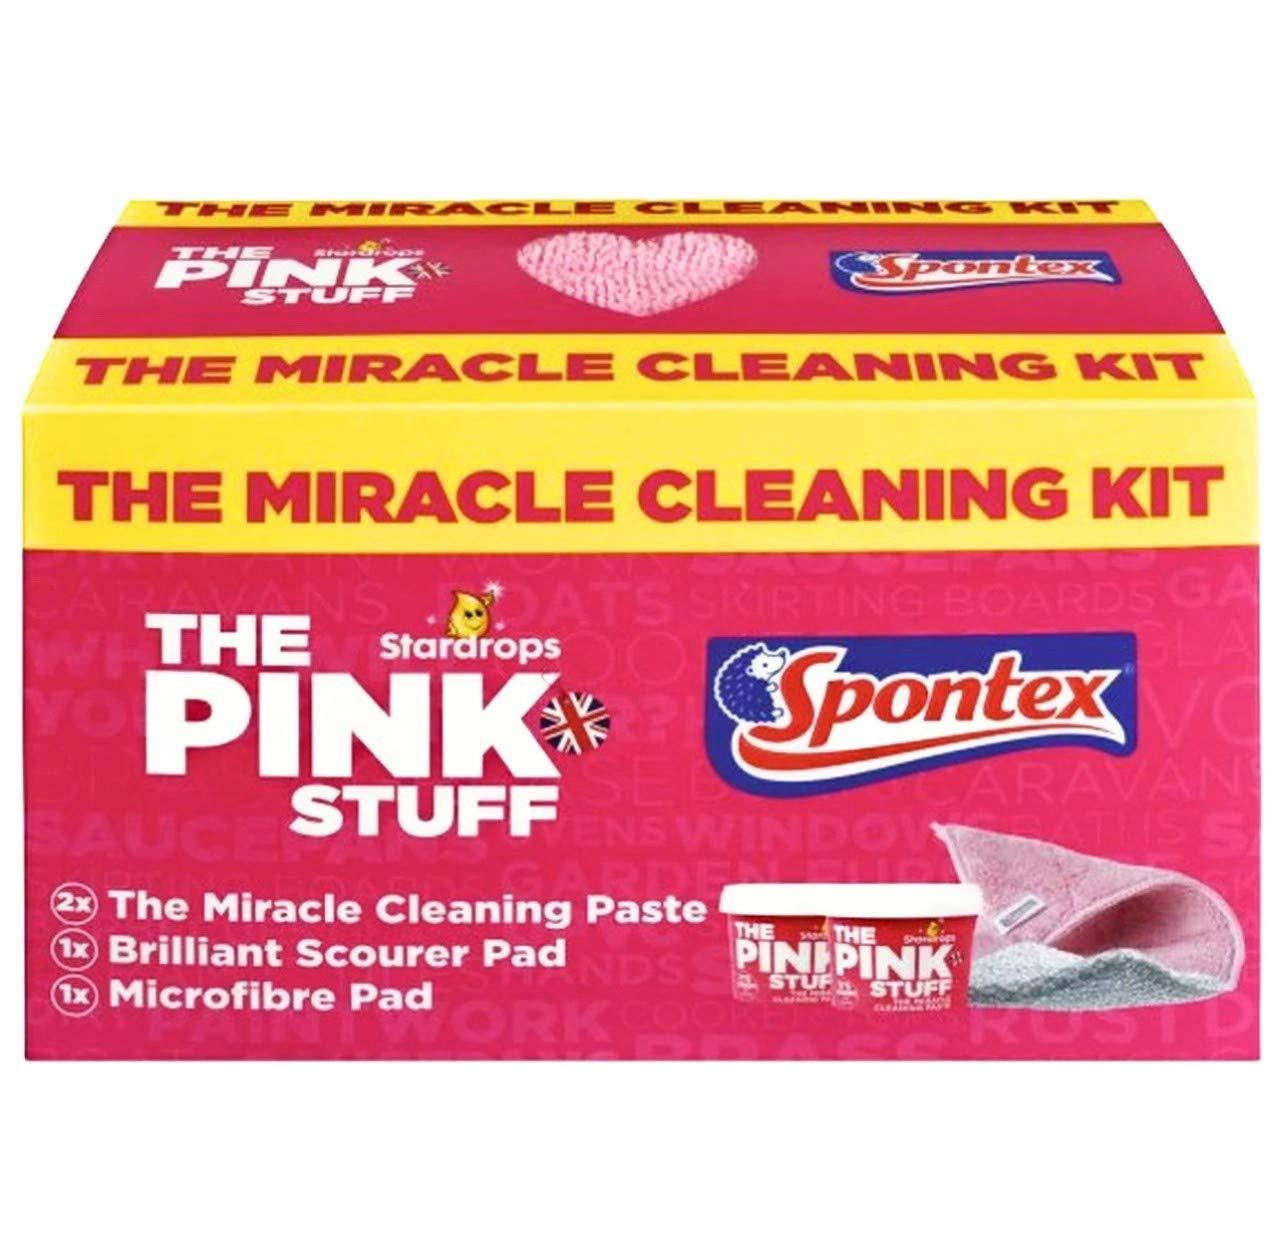 Stardrops - The Pink Stuff - The Miracle Cleaning Kit (2 Cleaning